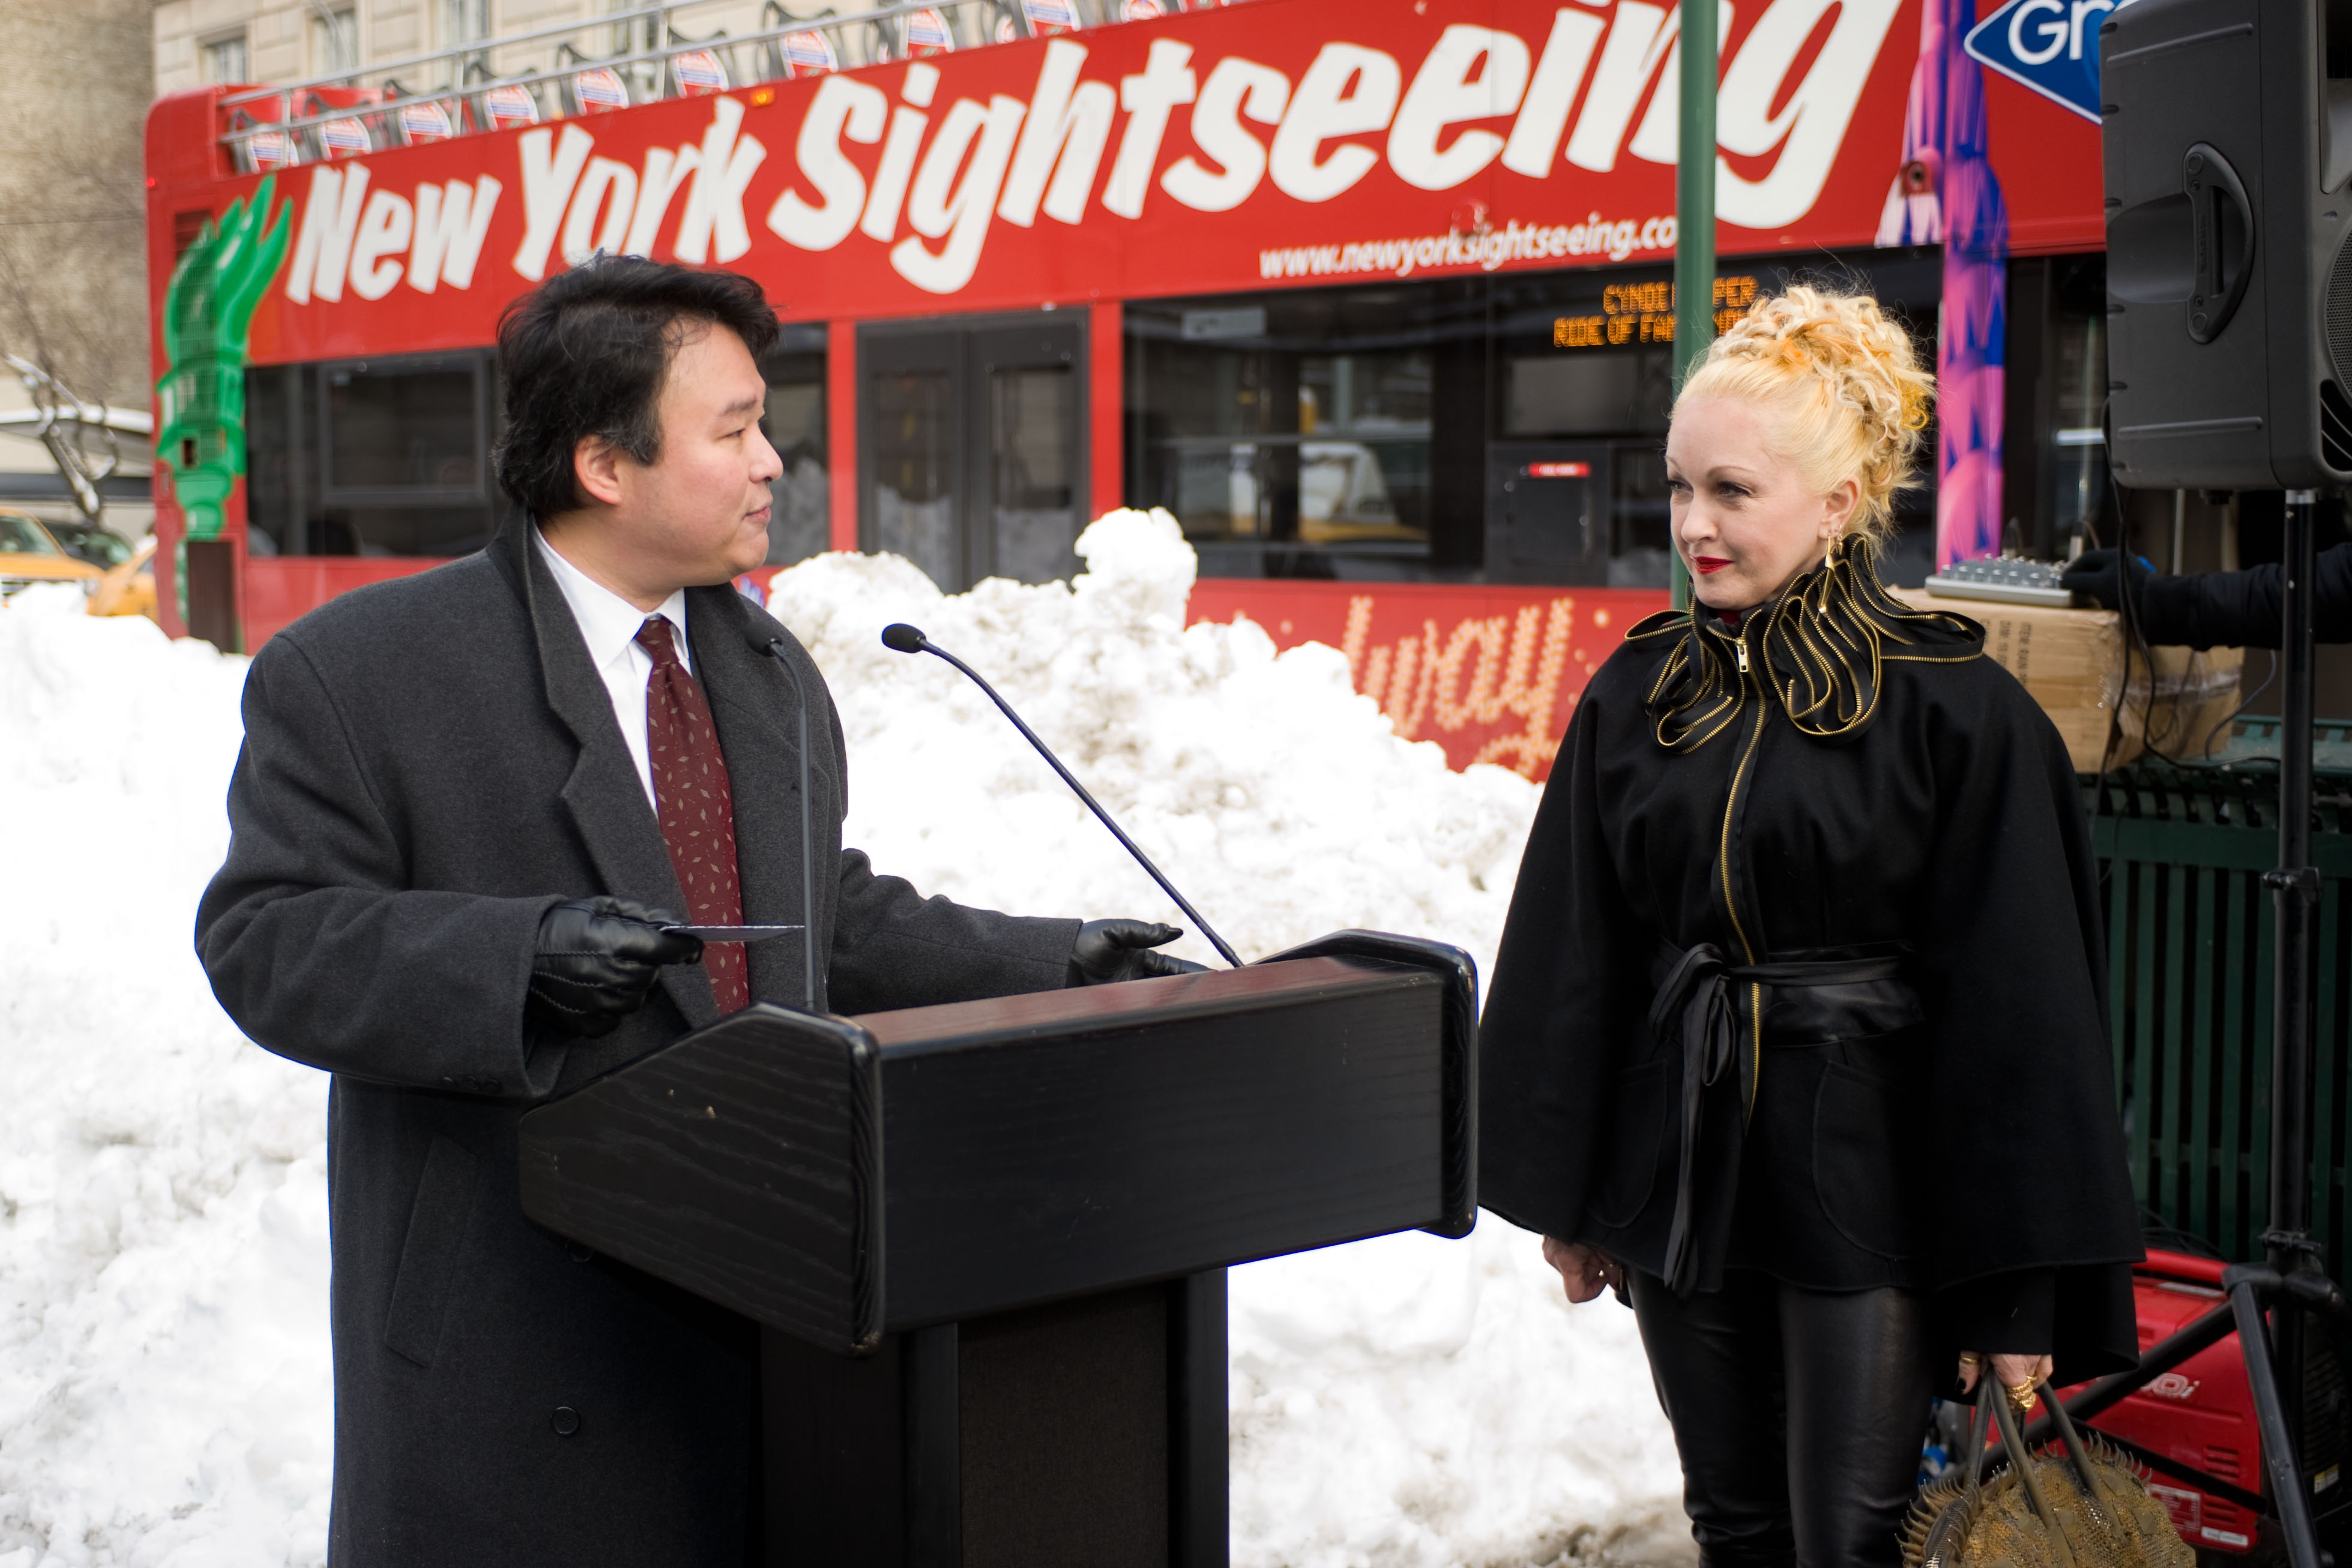 David W. Chien introduces Ride of Fame Honoree Cyndi Lauper (January 27th, 2011).